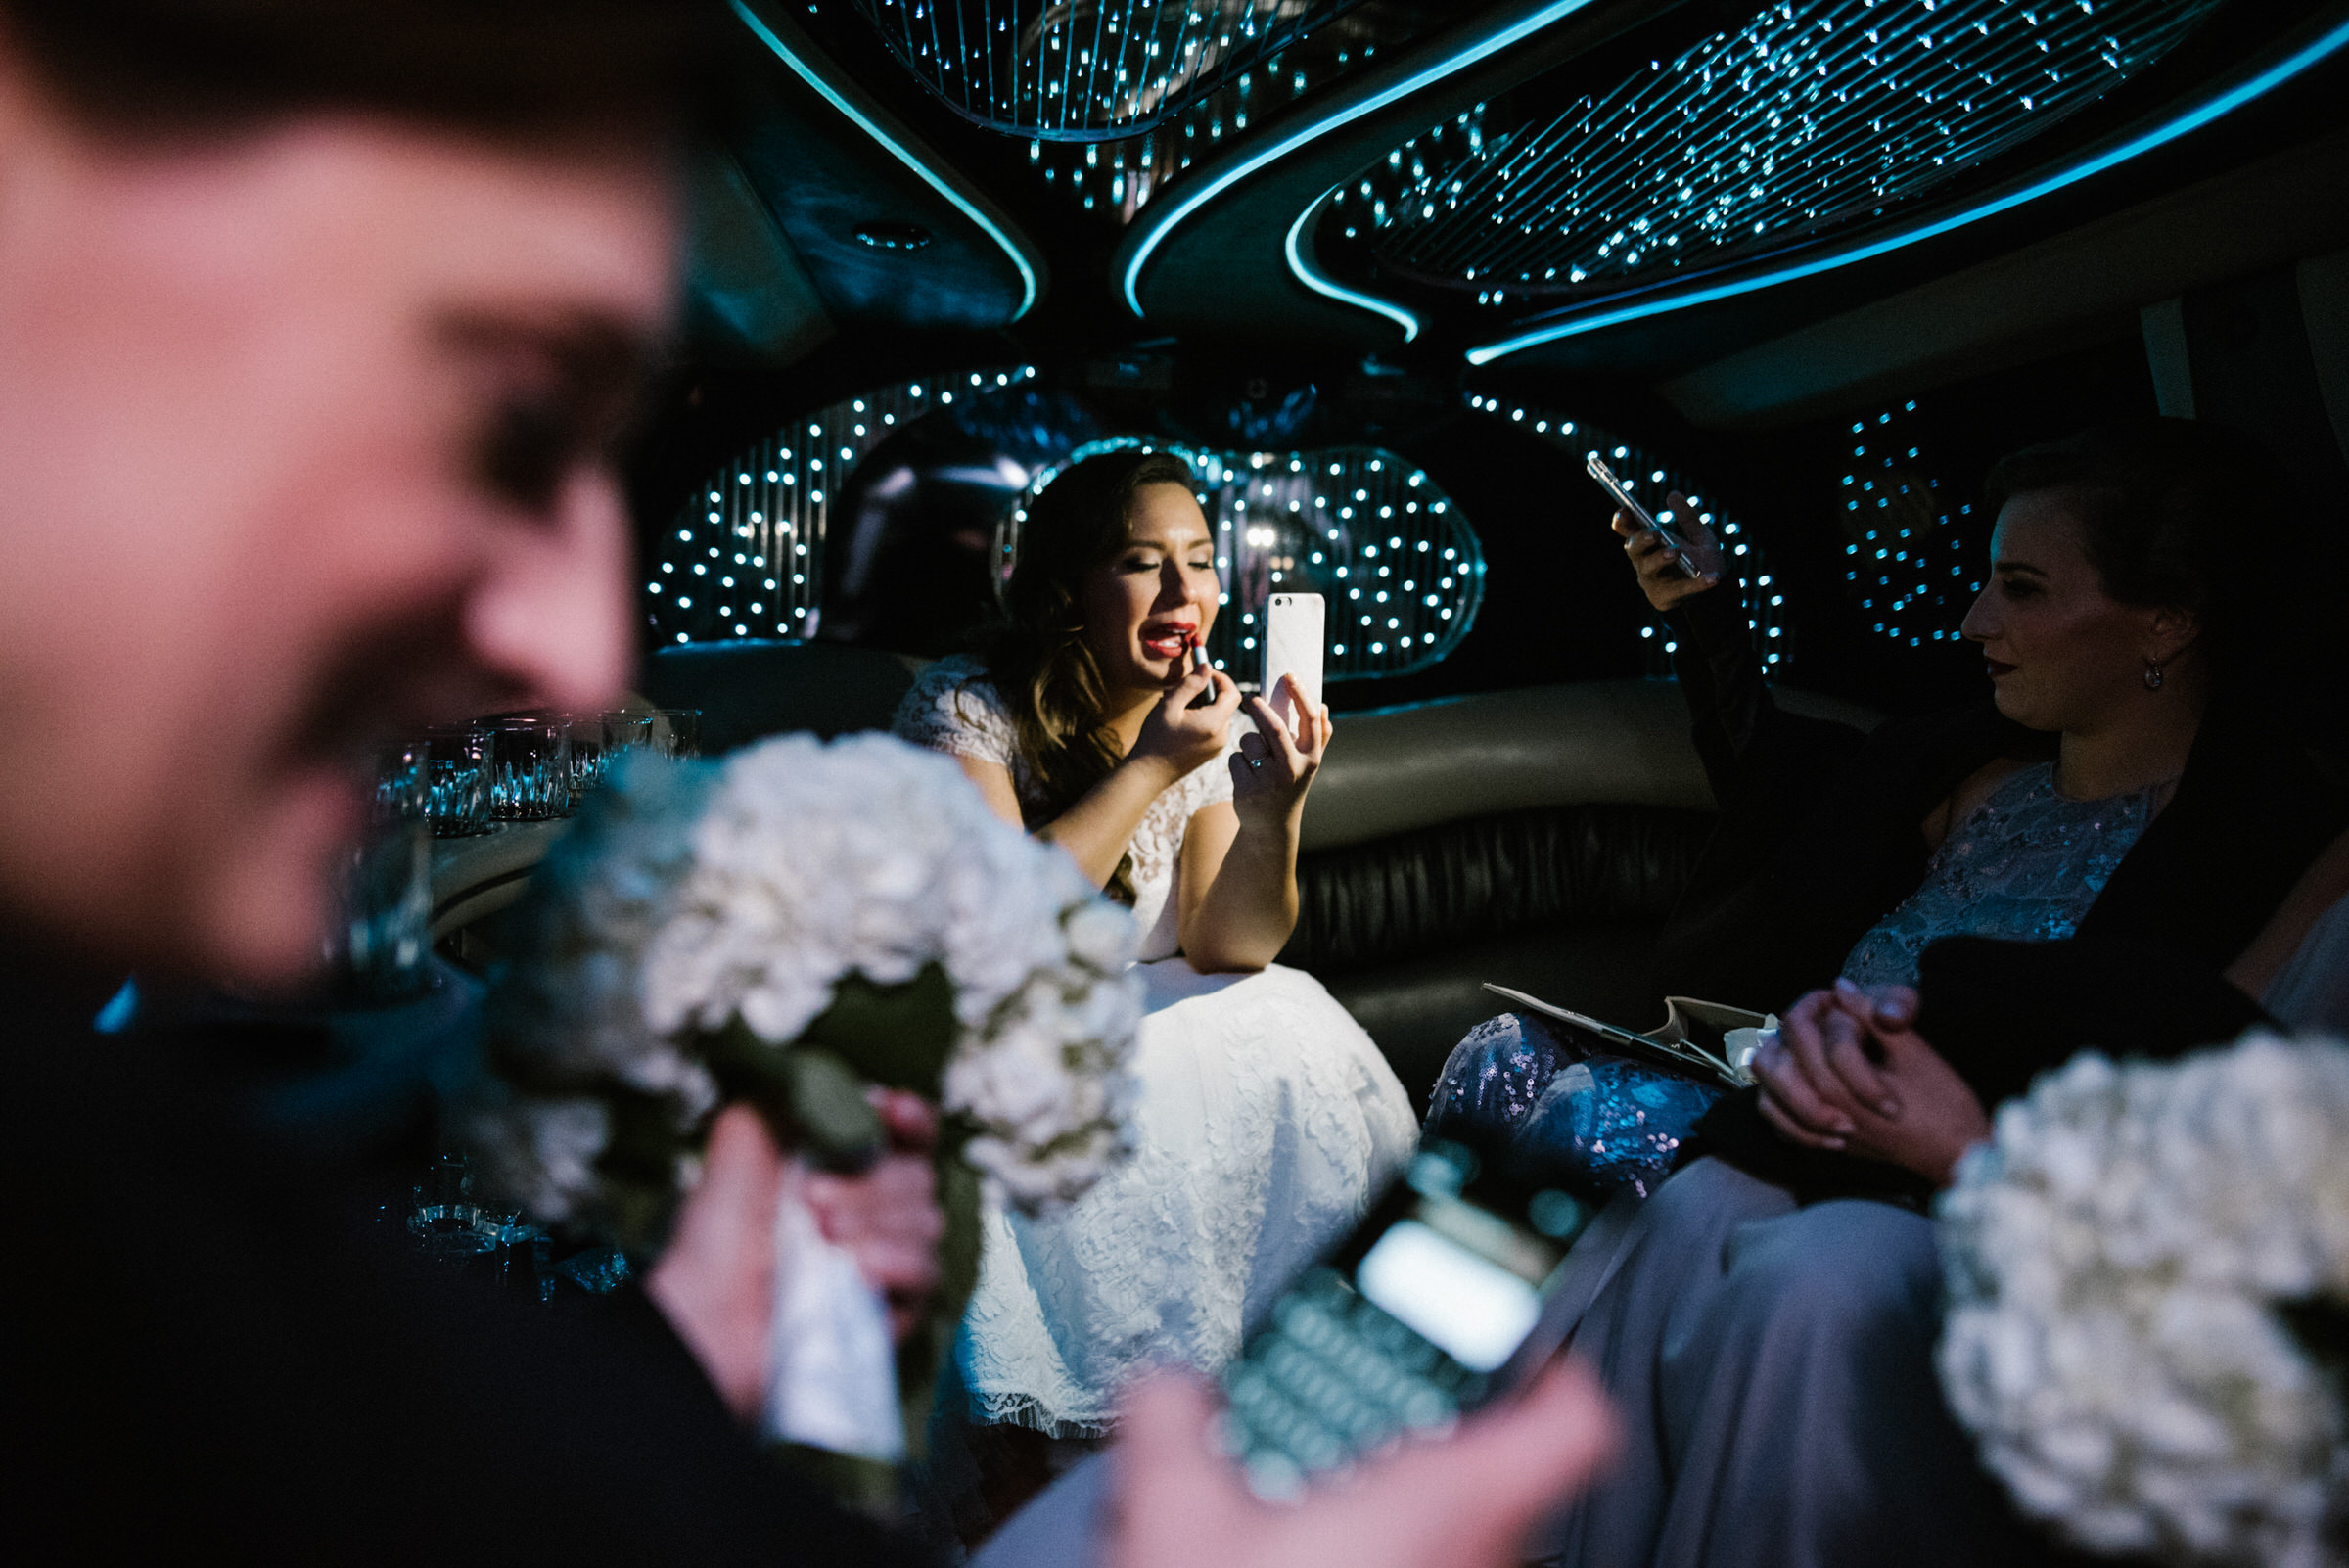 Nina and Nick ride their sweet limo to the Arctic Club in Seattle for their wedding reception